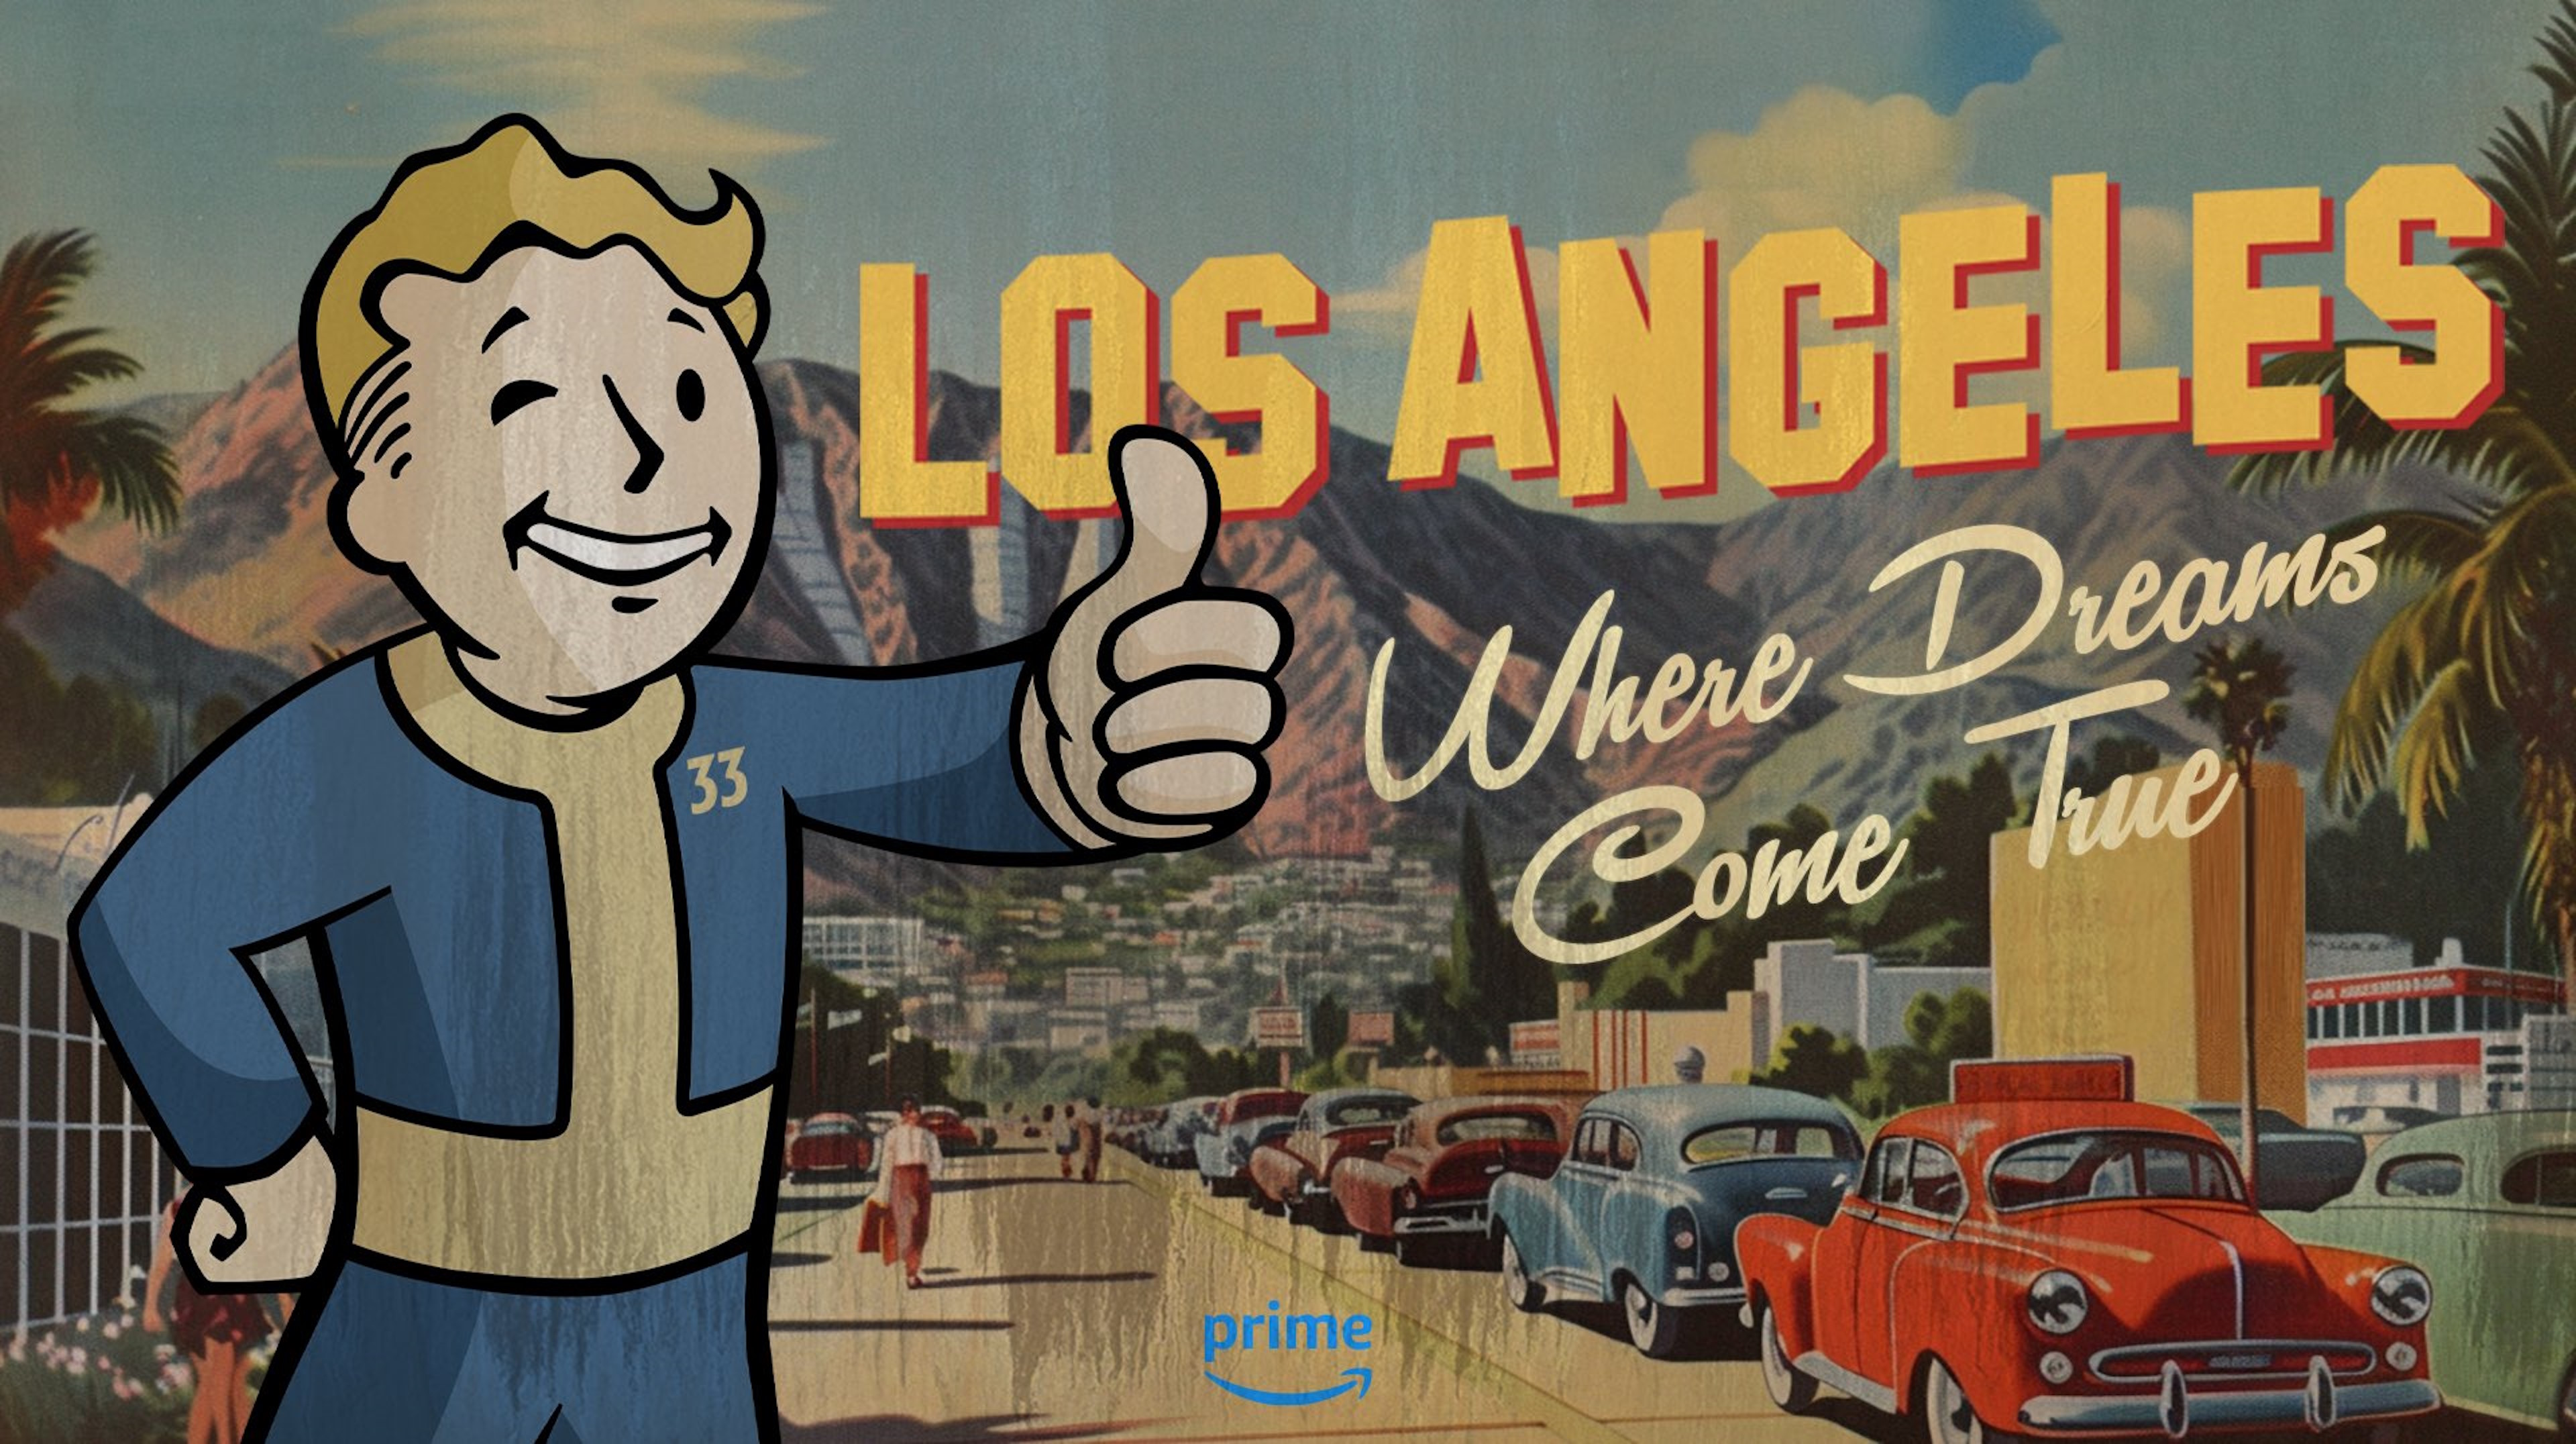  Amazon's Fallout TV show is coming in 2024 and will be set in Los Angeles, 'where dreams come true' even after a nuclear war 